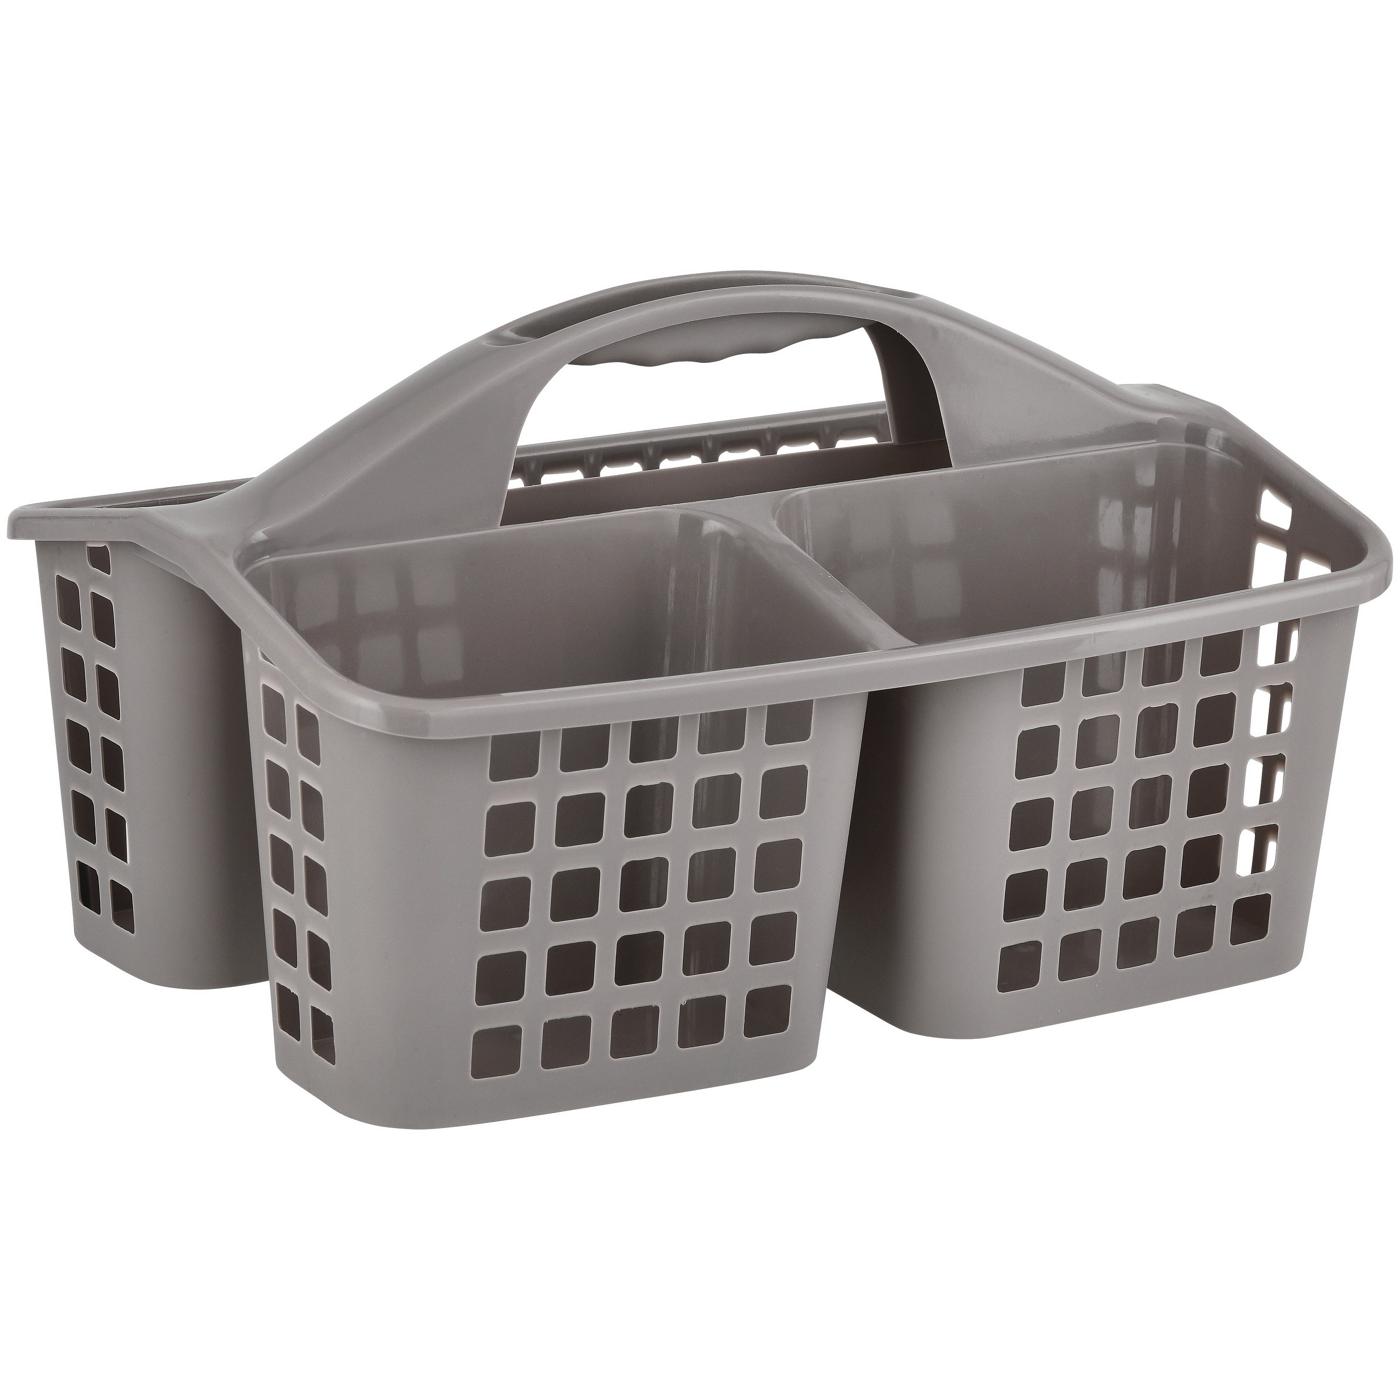 Destination Holiday Shower Caddy - Gray; image 1 of 3